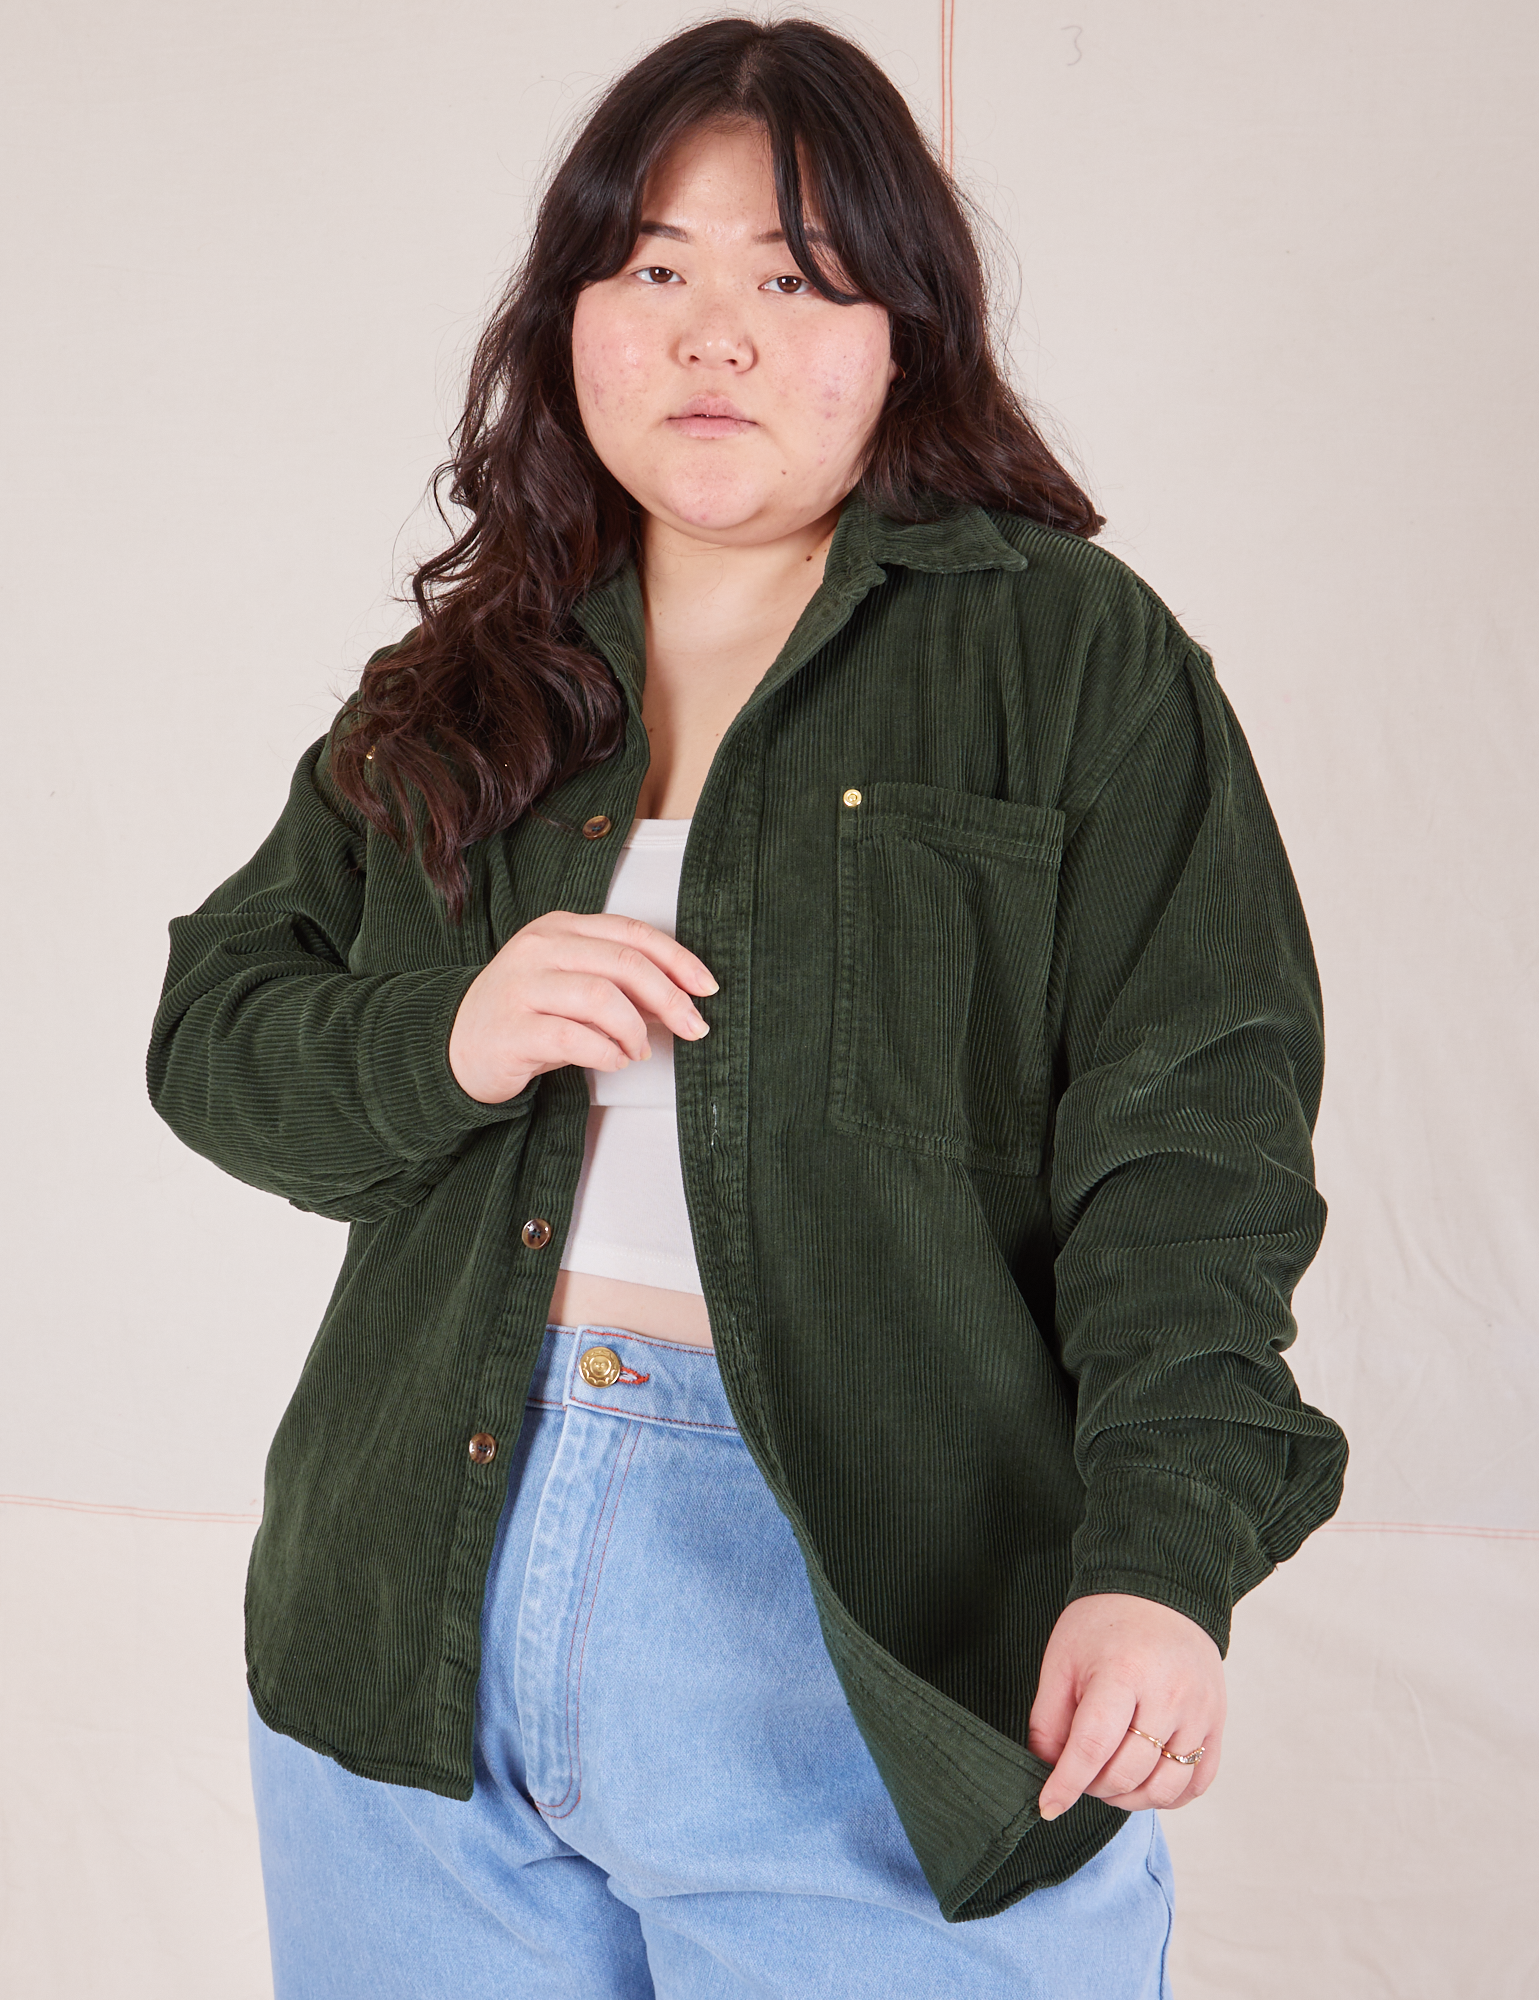 Ashley is 5&#39;7&quot; and wearing M Corduroy Overshirt in Swamp Green